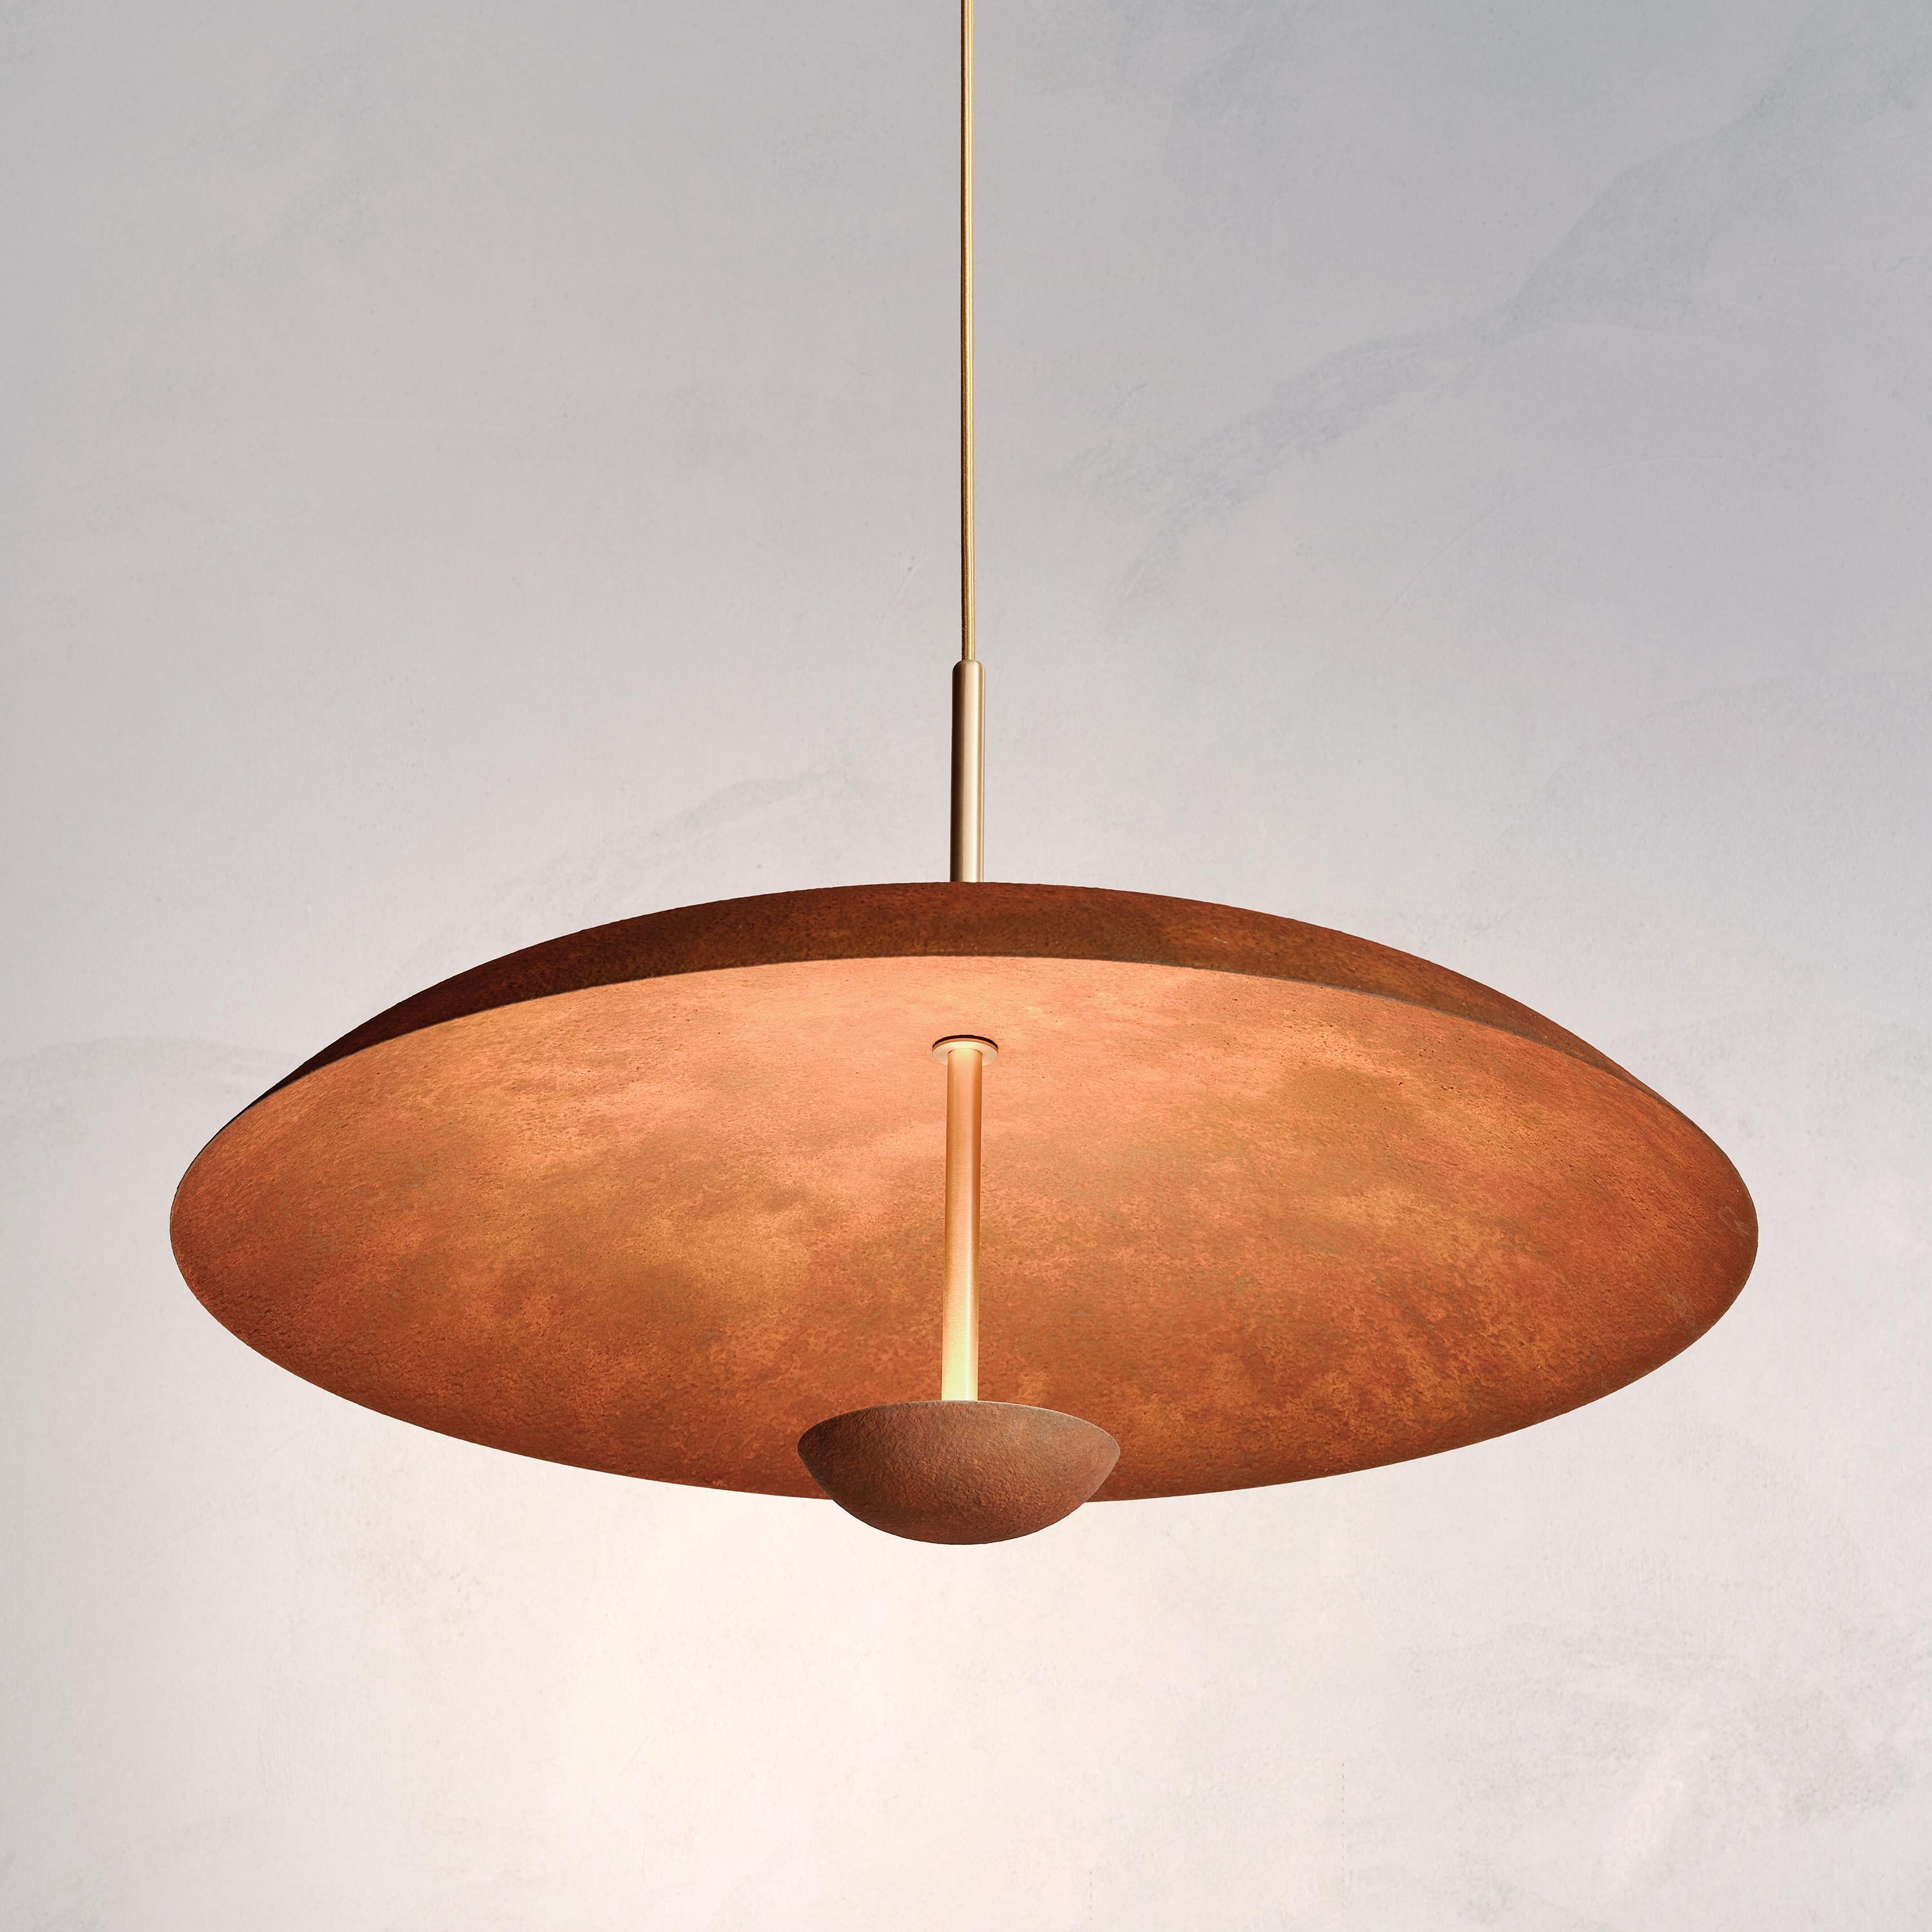 Two finely hand-spun brass plates make up this pendant light, finished in a mixed rust patina to create this unique appearance. The light is projected into the shade and reflects out, illuminating without creating a glare.
 
This light fixture is